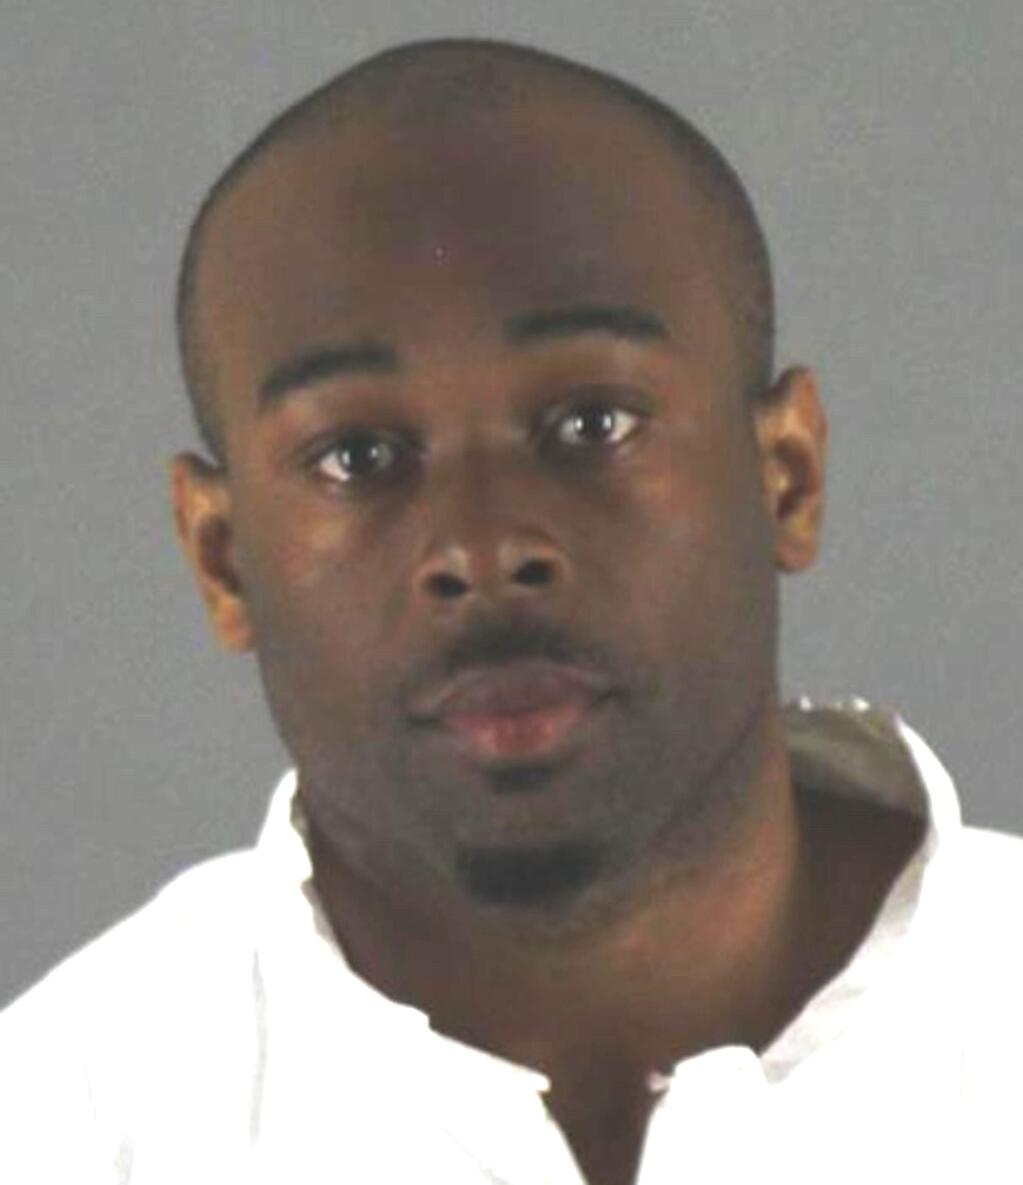 This undated photo provided by the Bloomington, Minn., Police Department, shows Emmanuel Deshawn Aranda, who was arrested in connection with an incident at the Mall of America where a 5-year-old boy plummeted three floors Friday, April 12, 2019, after being pushed or thrown from a balcony. (Bloomington Police Department via AP)